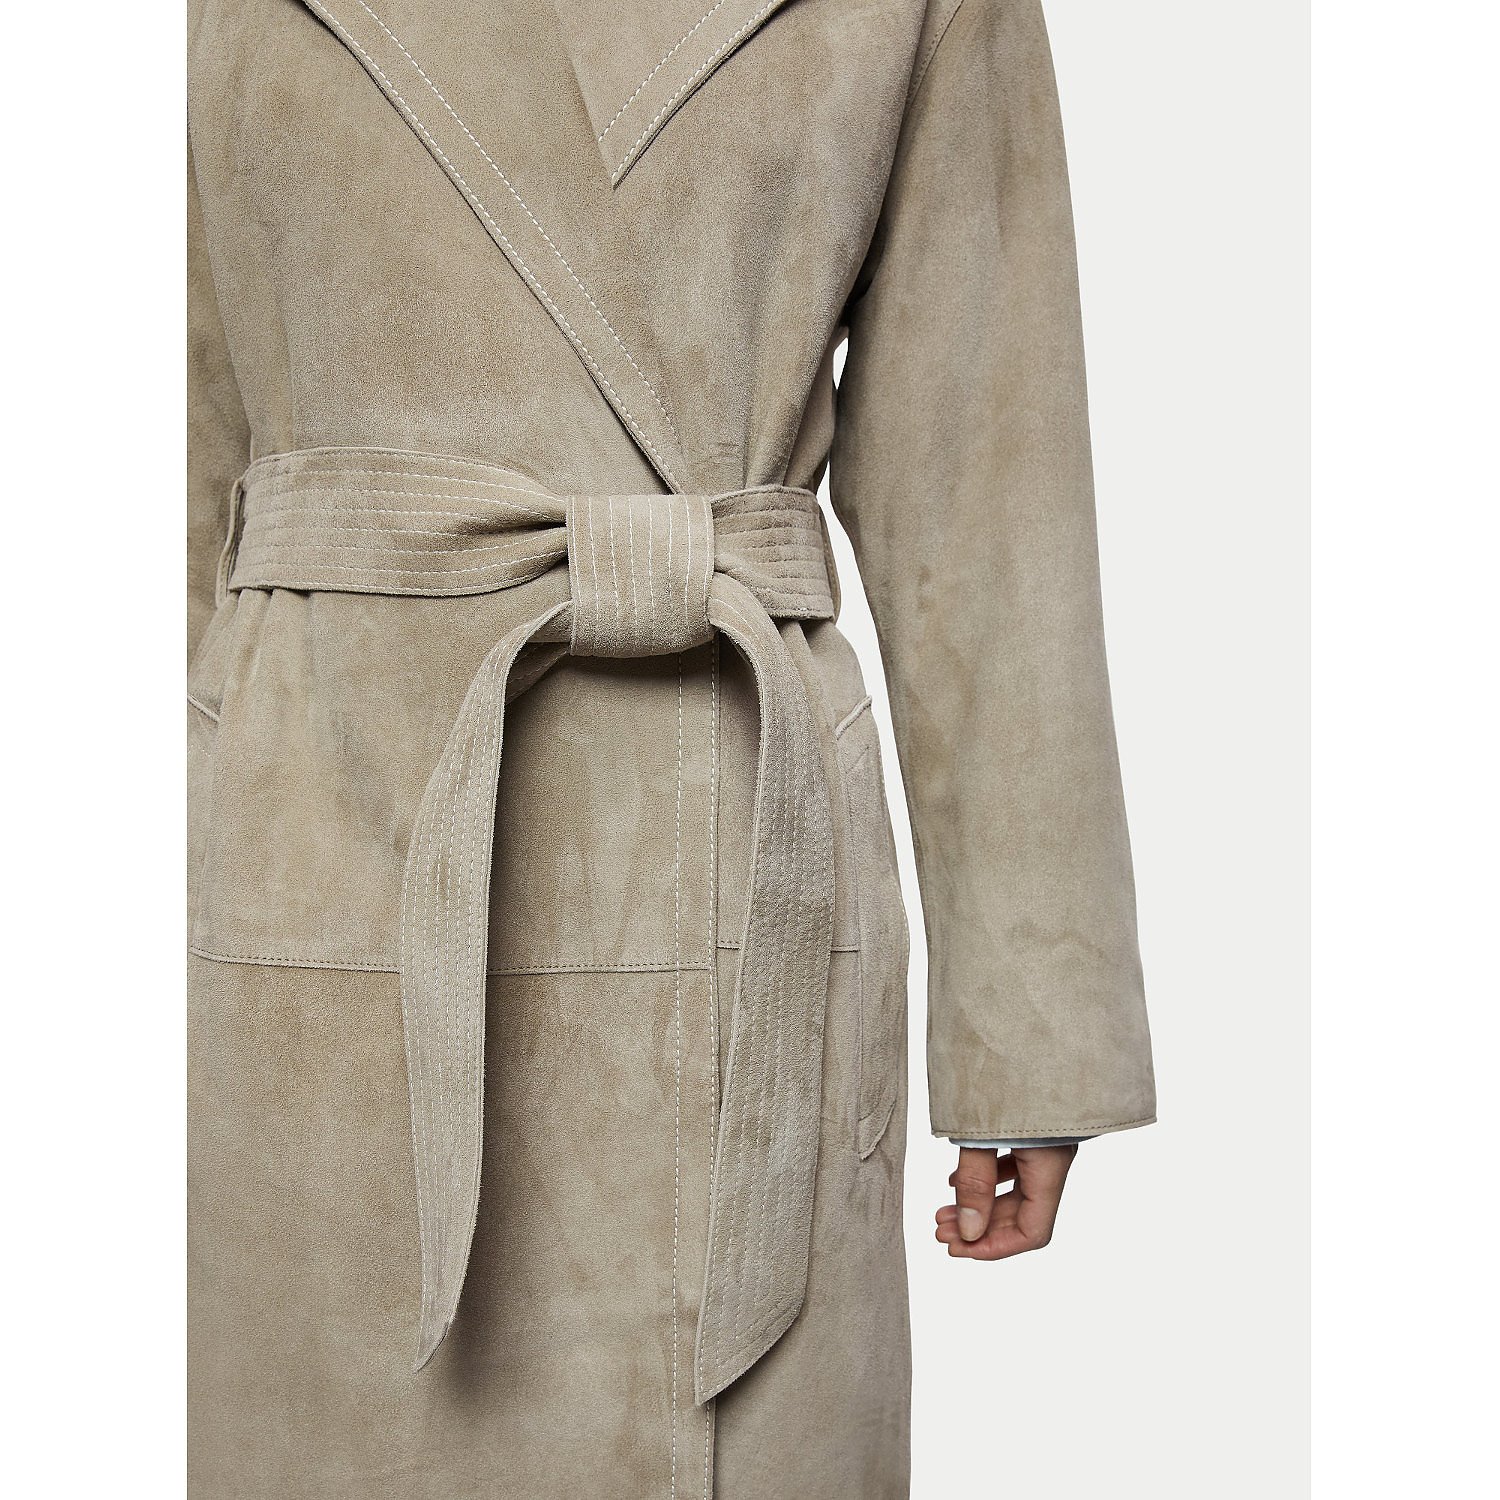 Jigsaw Valor Suede Trench